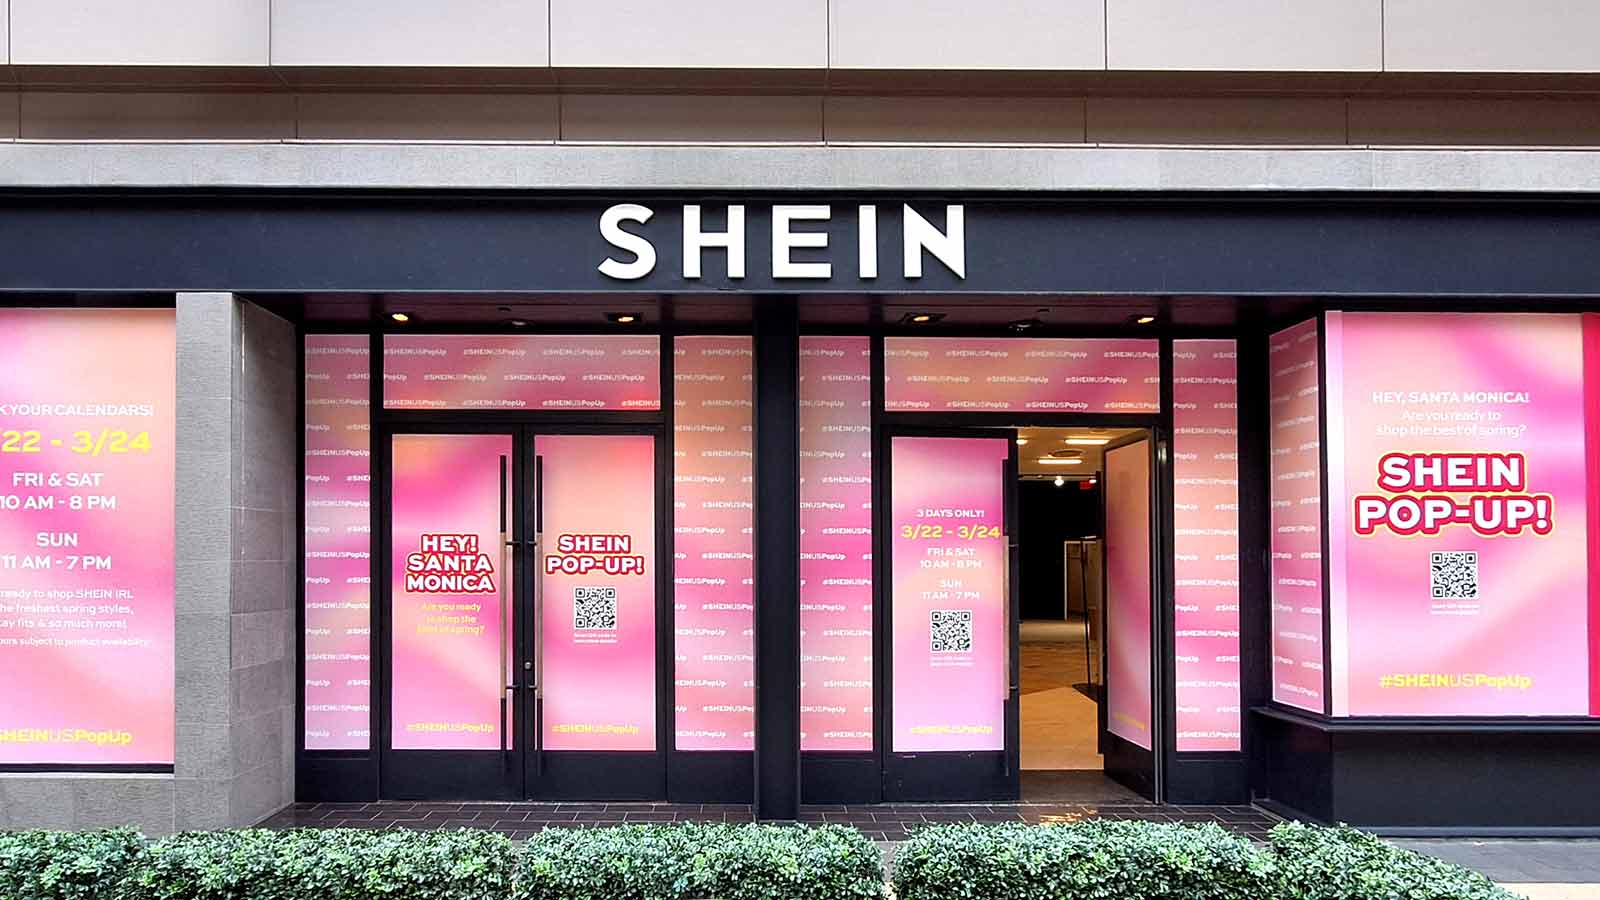 shein 3d letters on the building facade